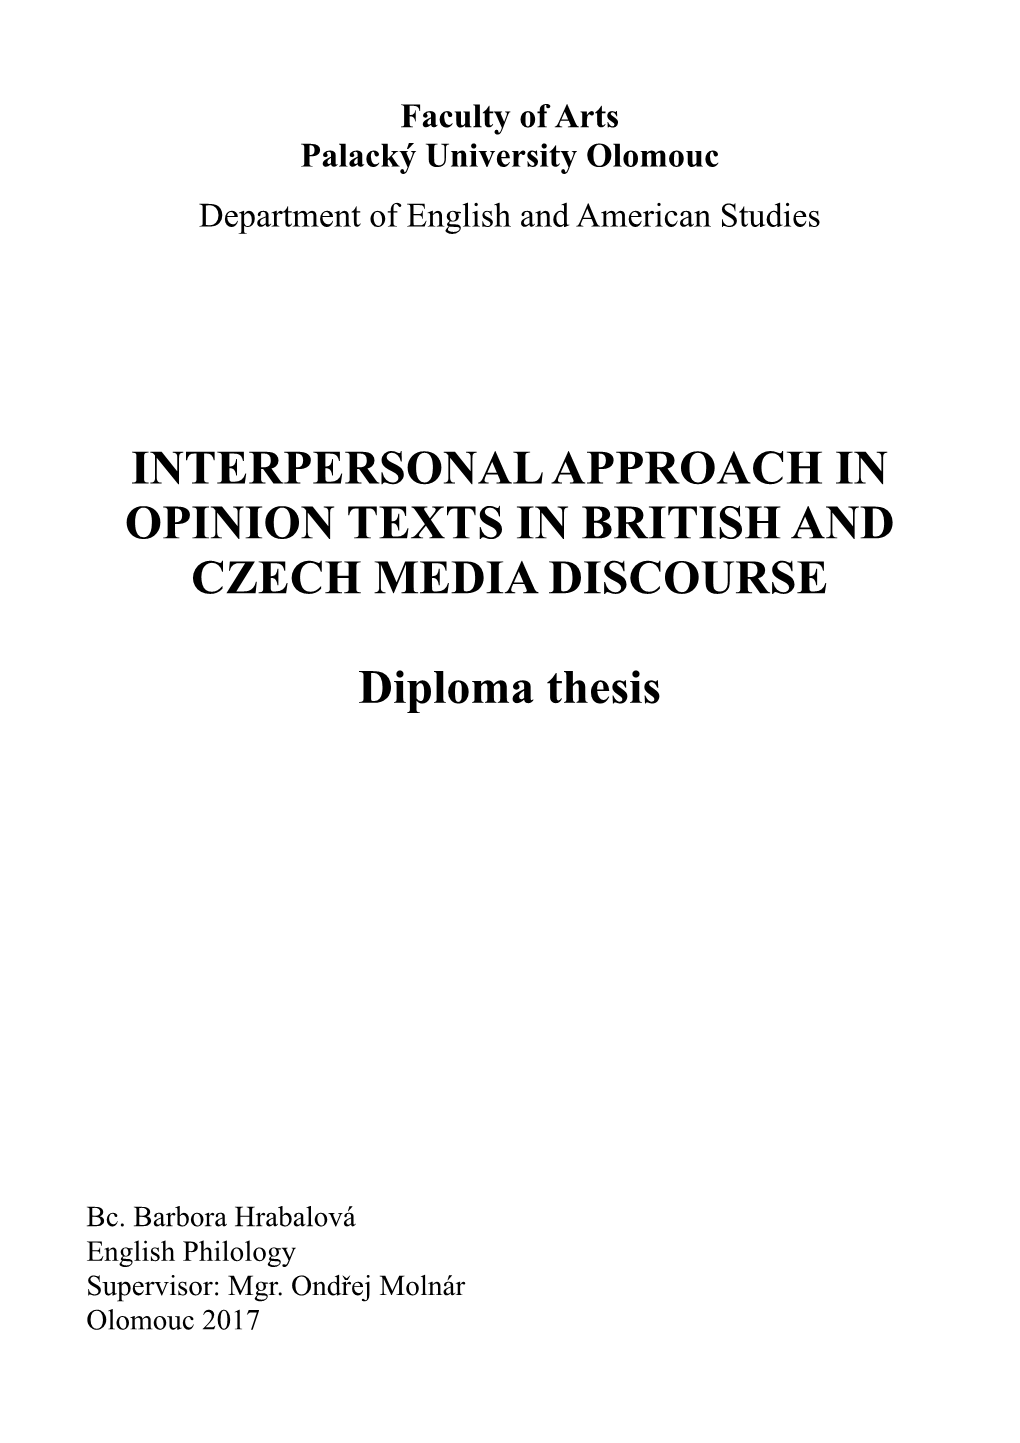 Interpersonal Approach in Opinion Texts in British and Czech Media Discourse